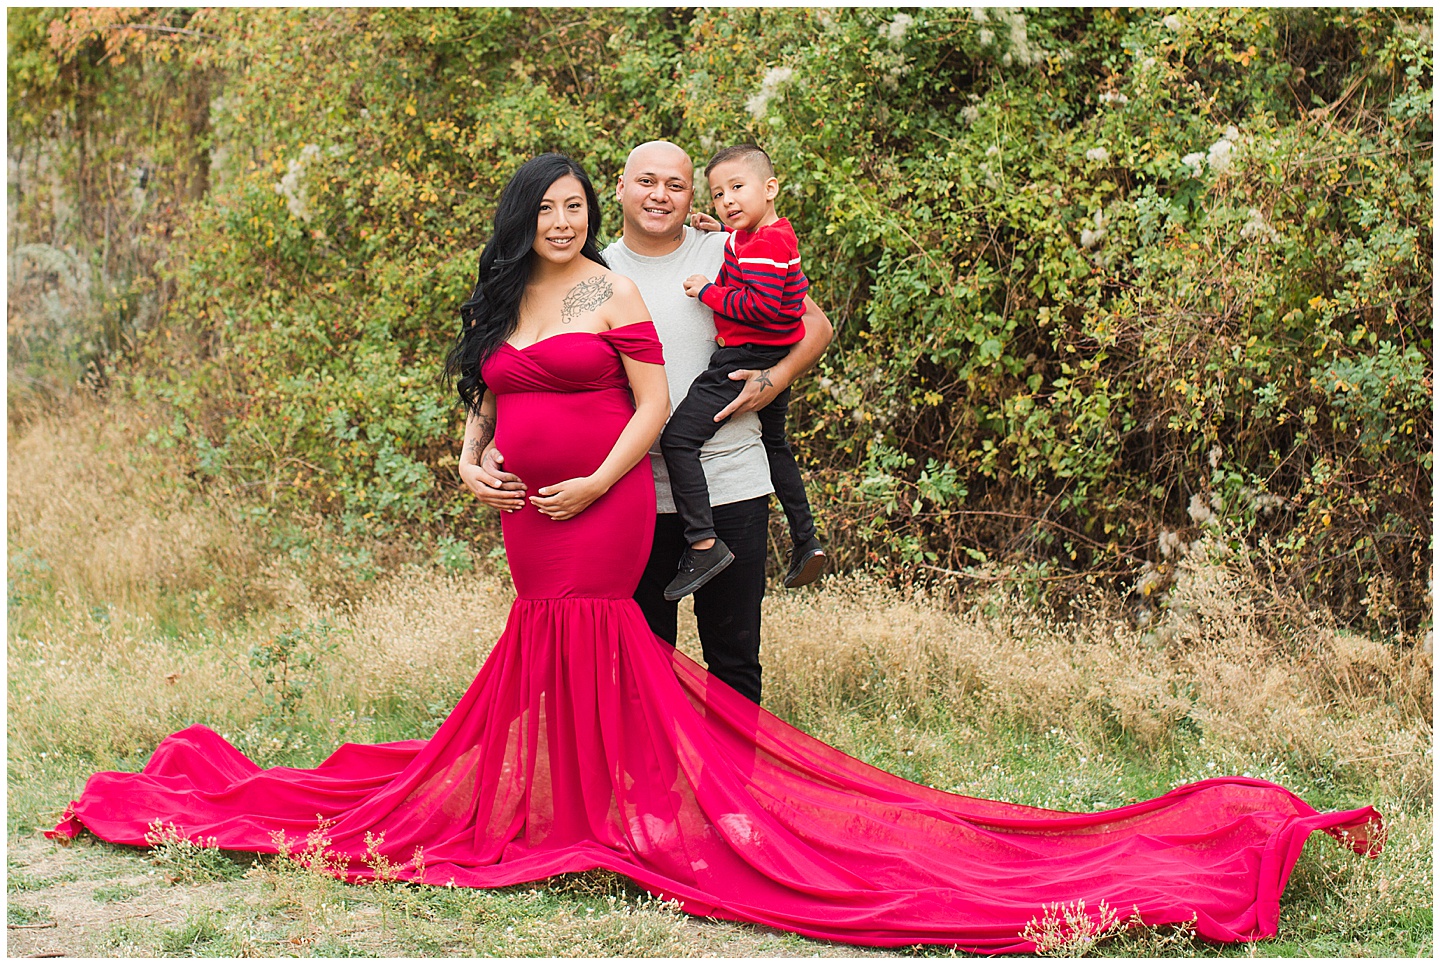 Vineyard and Mountain Red Dress Glamour Maternity Session Tiffany Joy W Photography